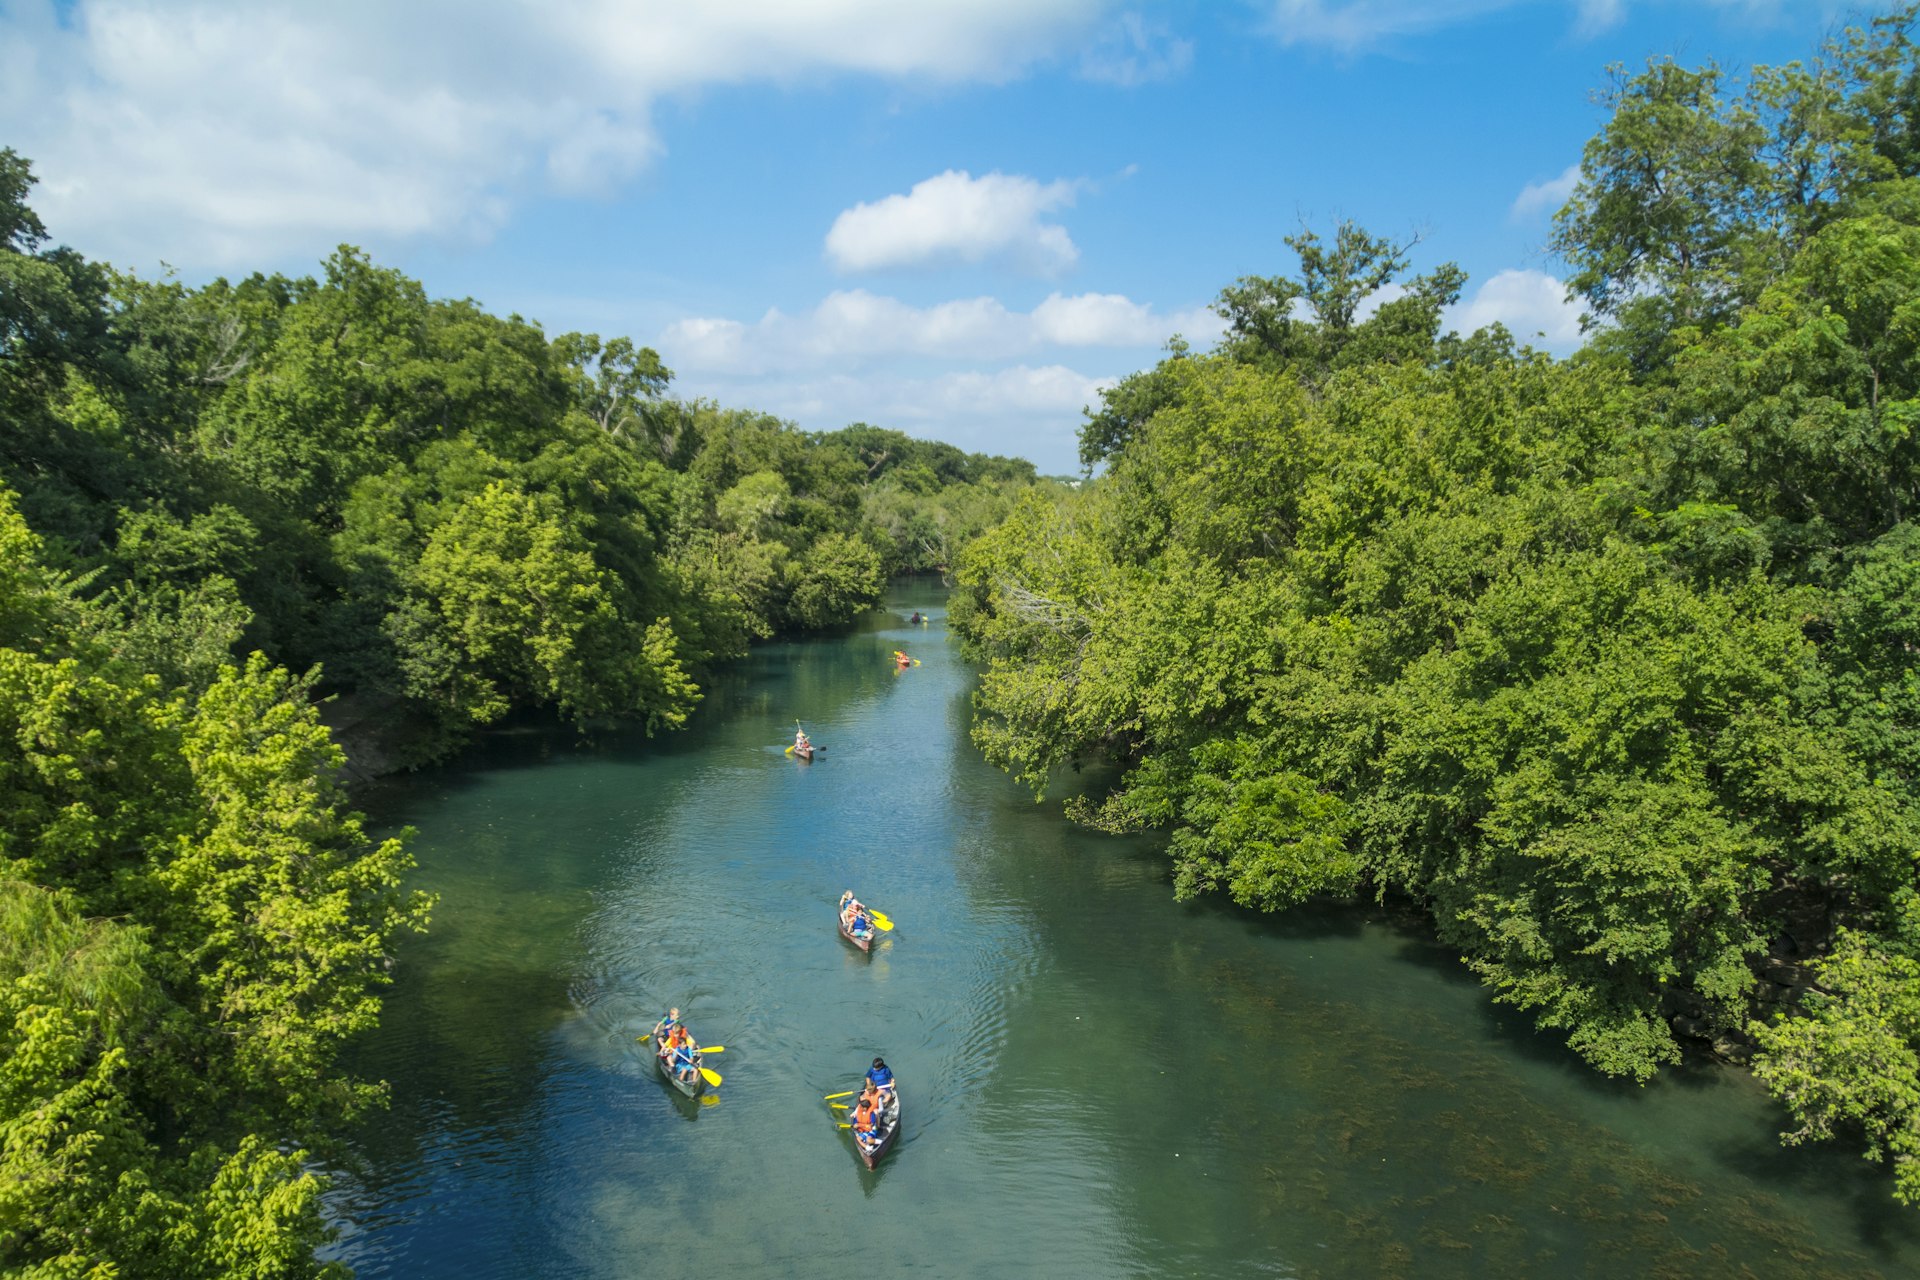 500px Photo ID: 115813359 - Barton Creek is 5 minutes from downtown Austin and is connect to Lady Bird Lake.  Downtown Austin, Texas.